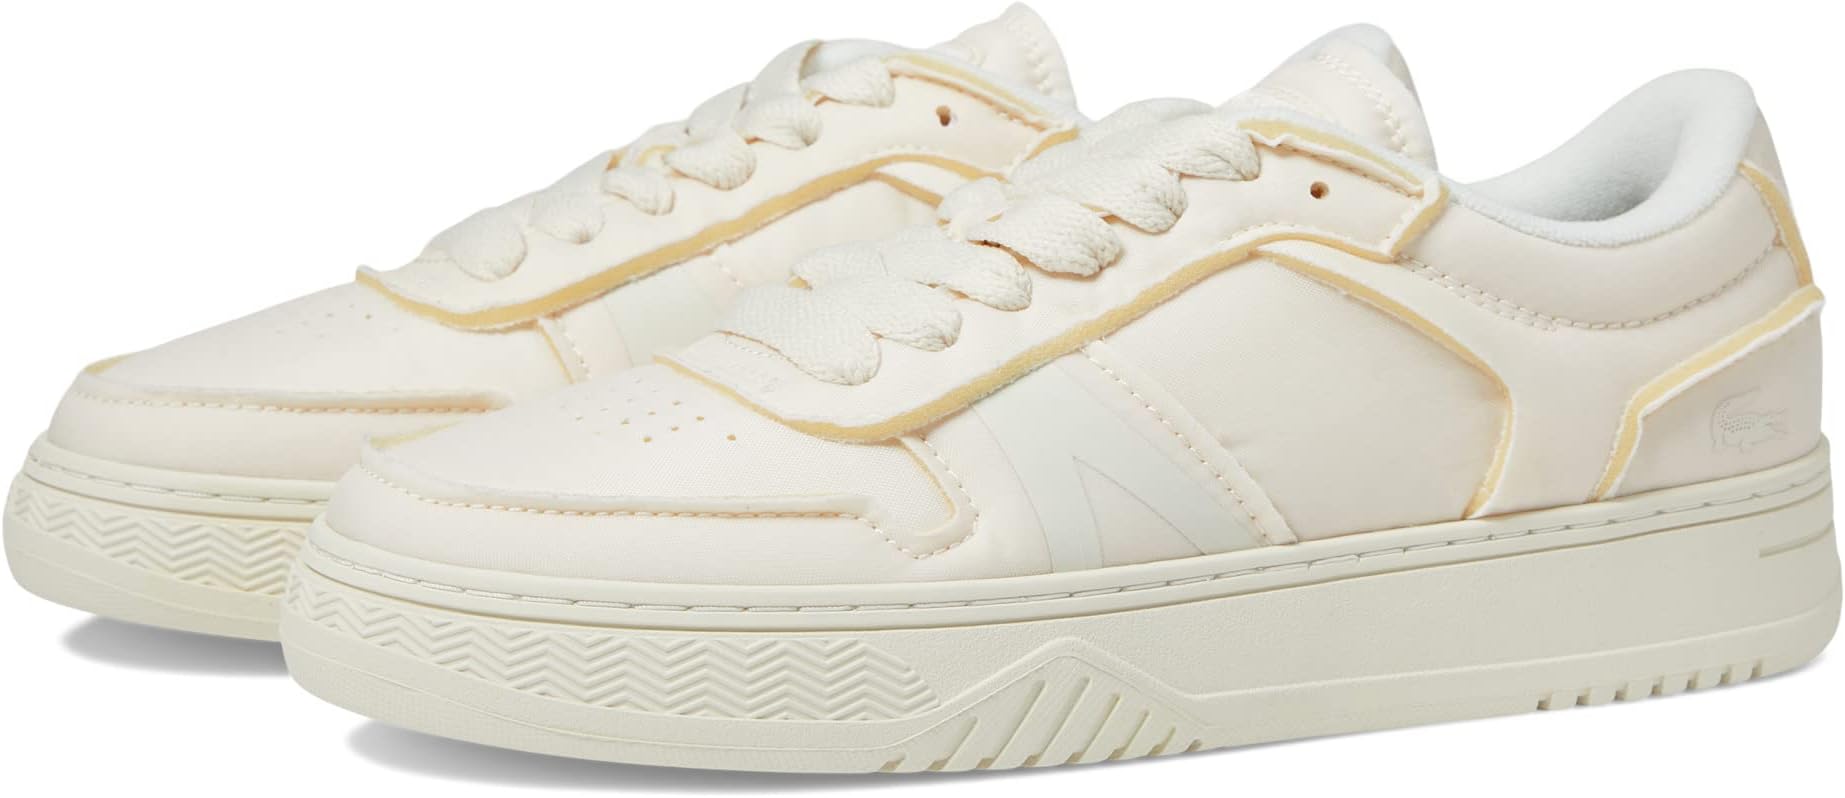 Кроссовки L001 Crafted 123 1 Lacoste, цвет Off-White/Off-White кроссовки lacoste zapatillas off white